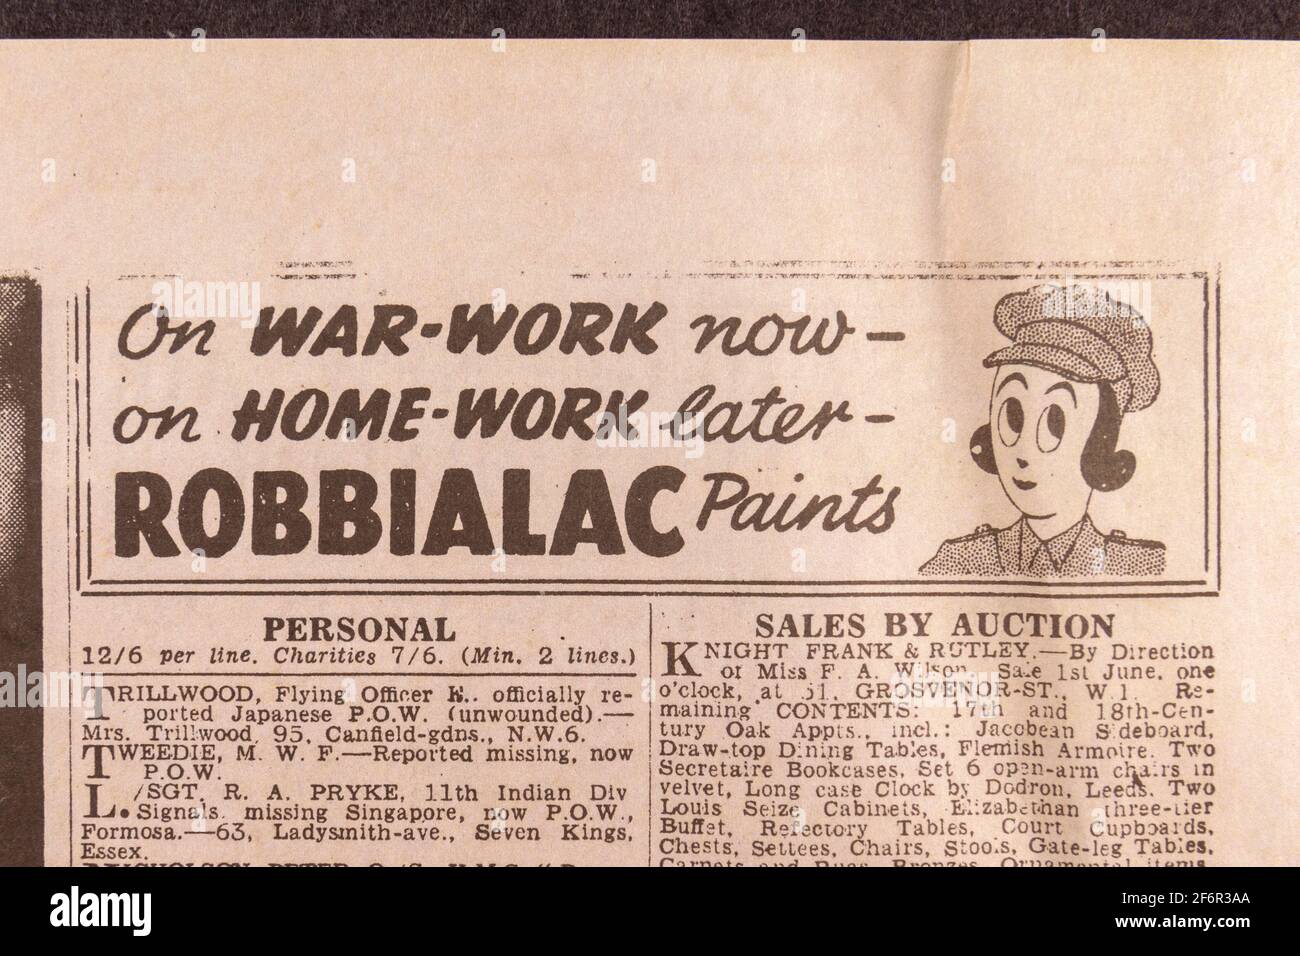 Advert for Robbialac Paints in the Daily Telegraph (replica), 18th May 1943, the day after the Dam Busters raid. Stock Photo